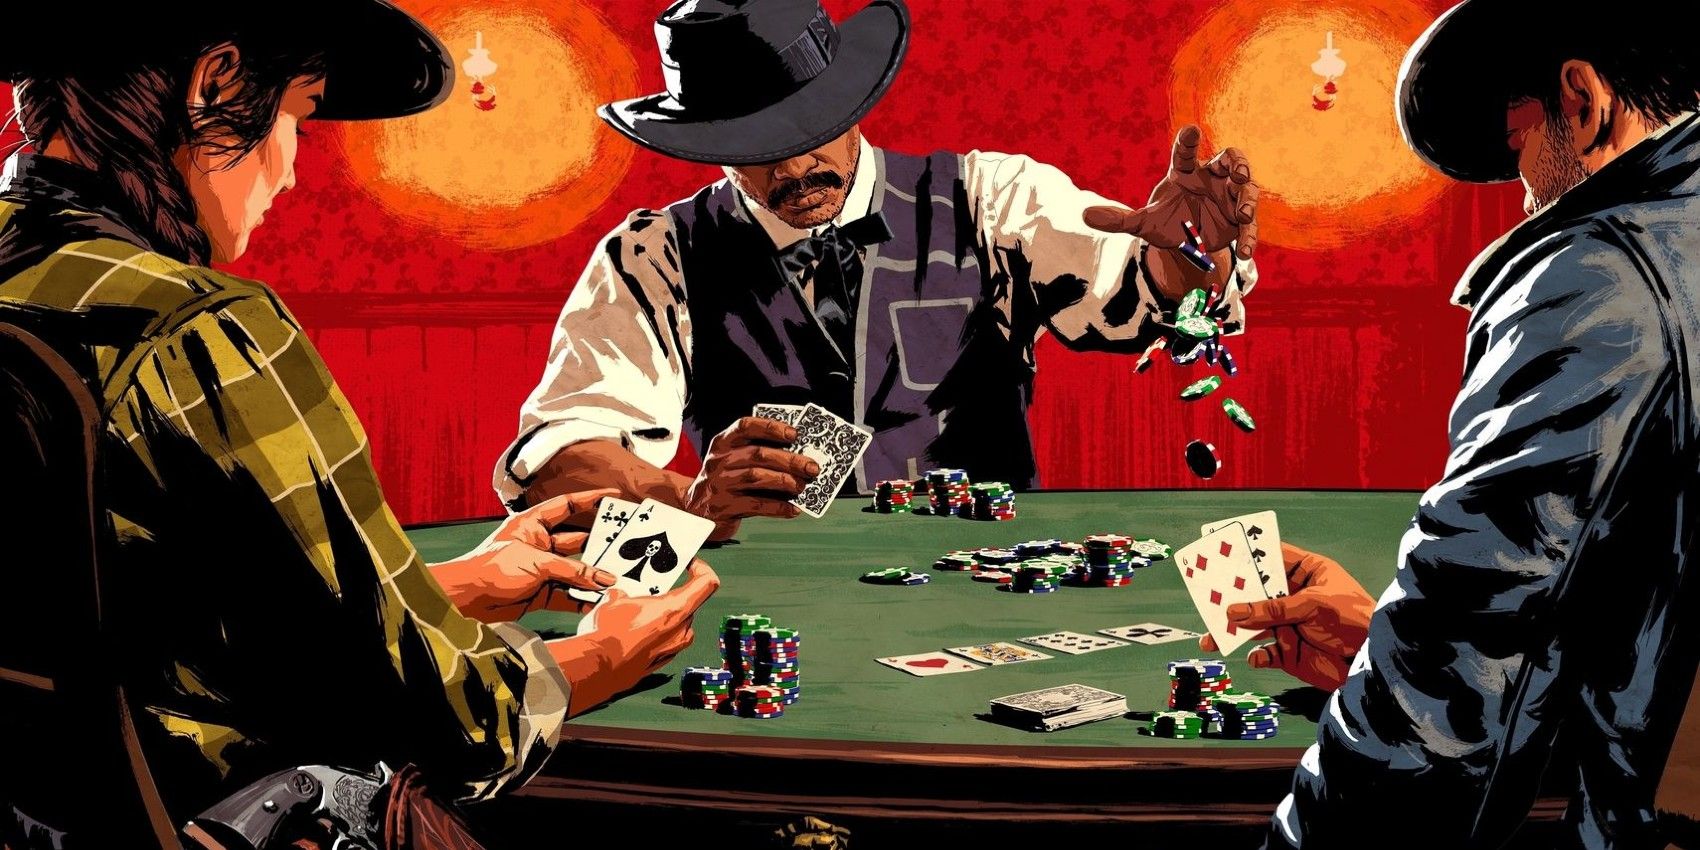 Poker in RDR 2 takes some time to learn, but can pay off handsomely.